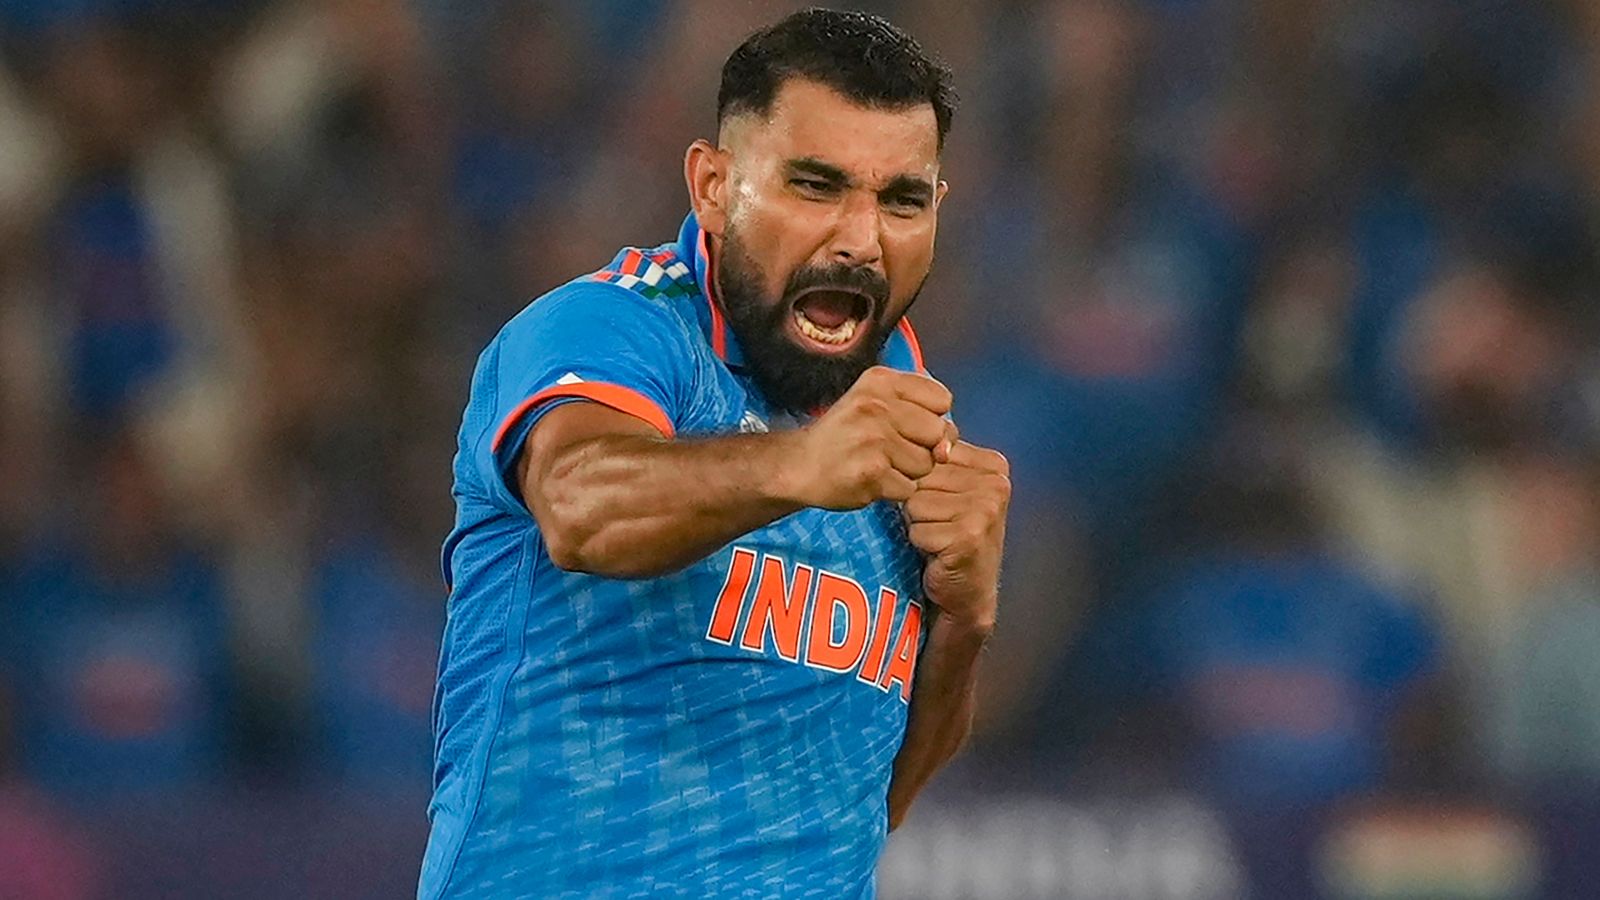 Mohammed Shami hits back over ball change conspiracy theory, says ‘few